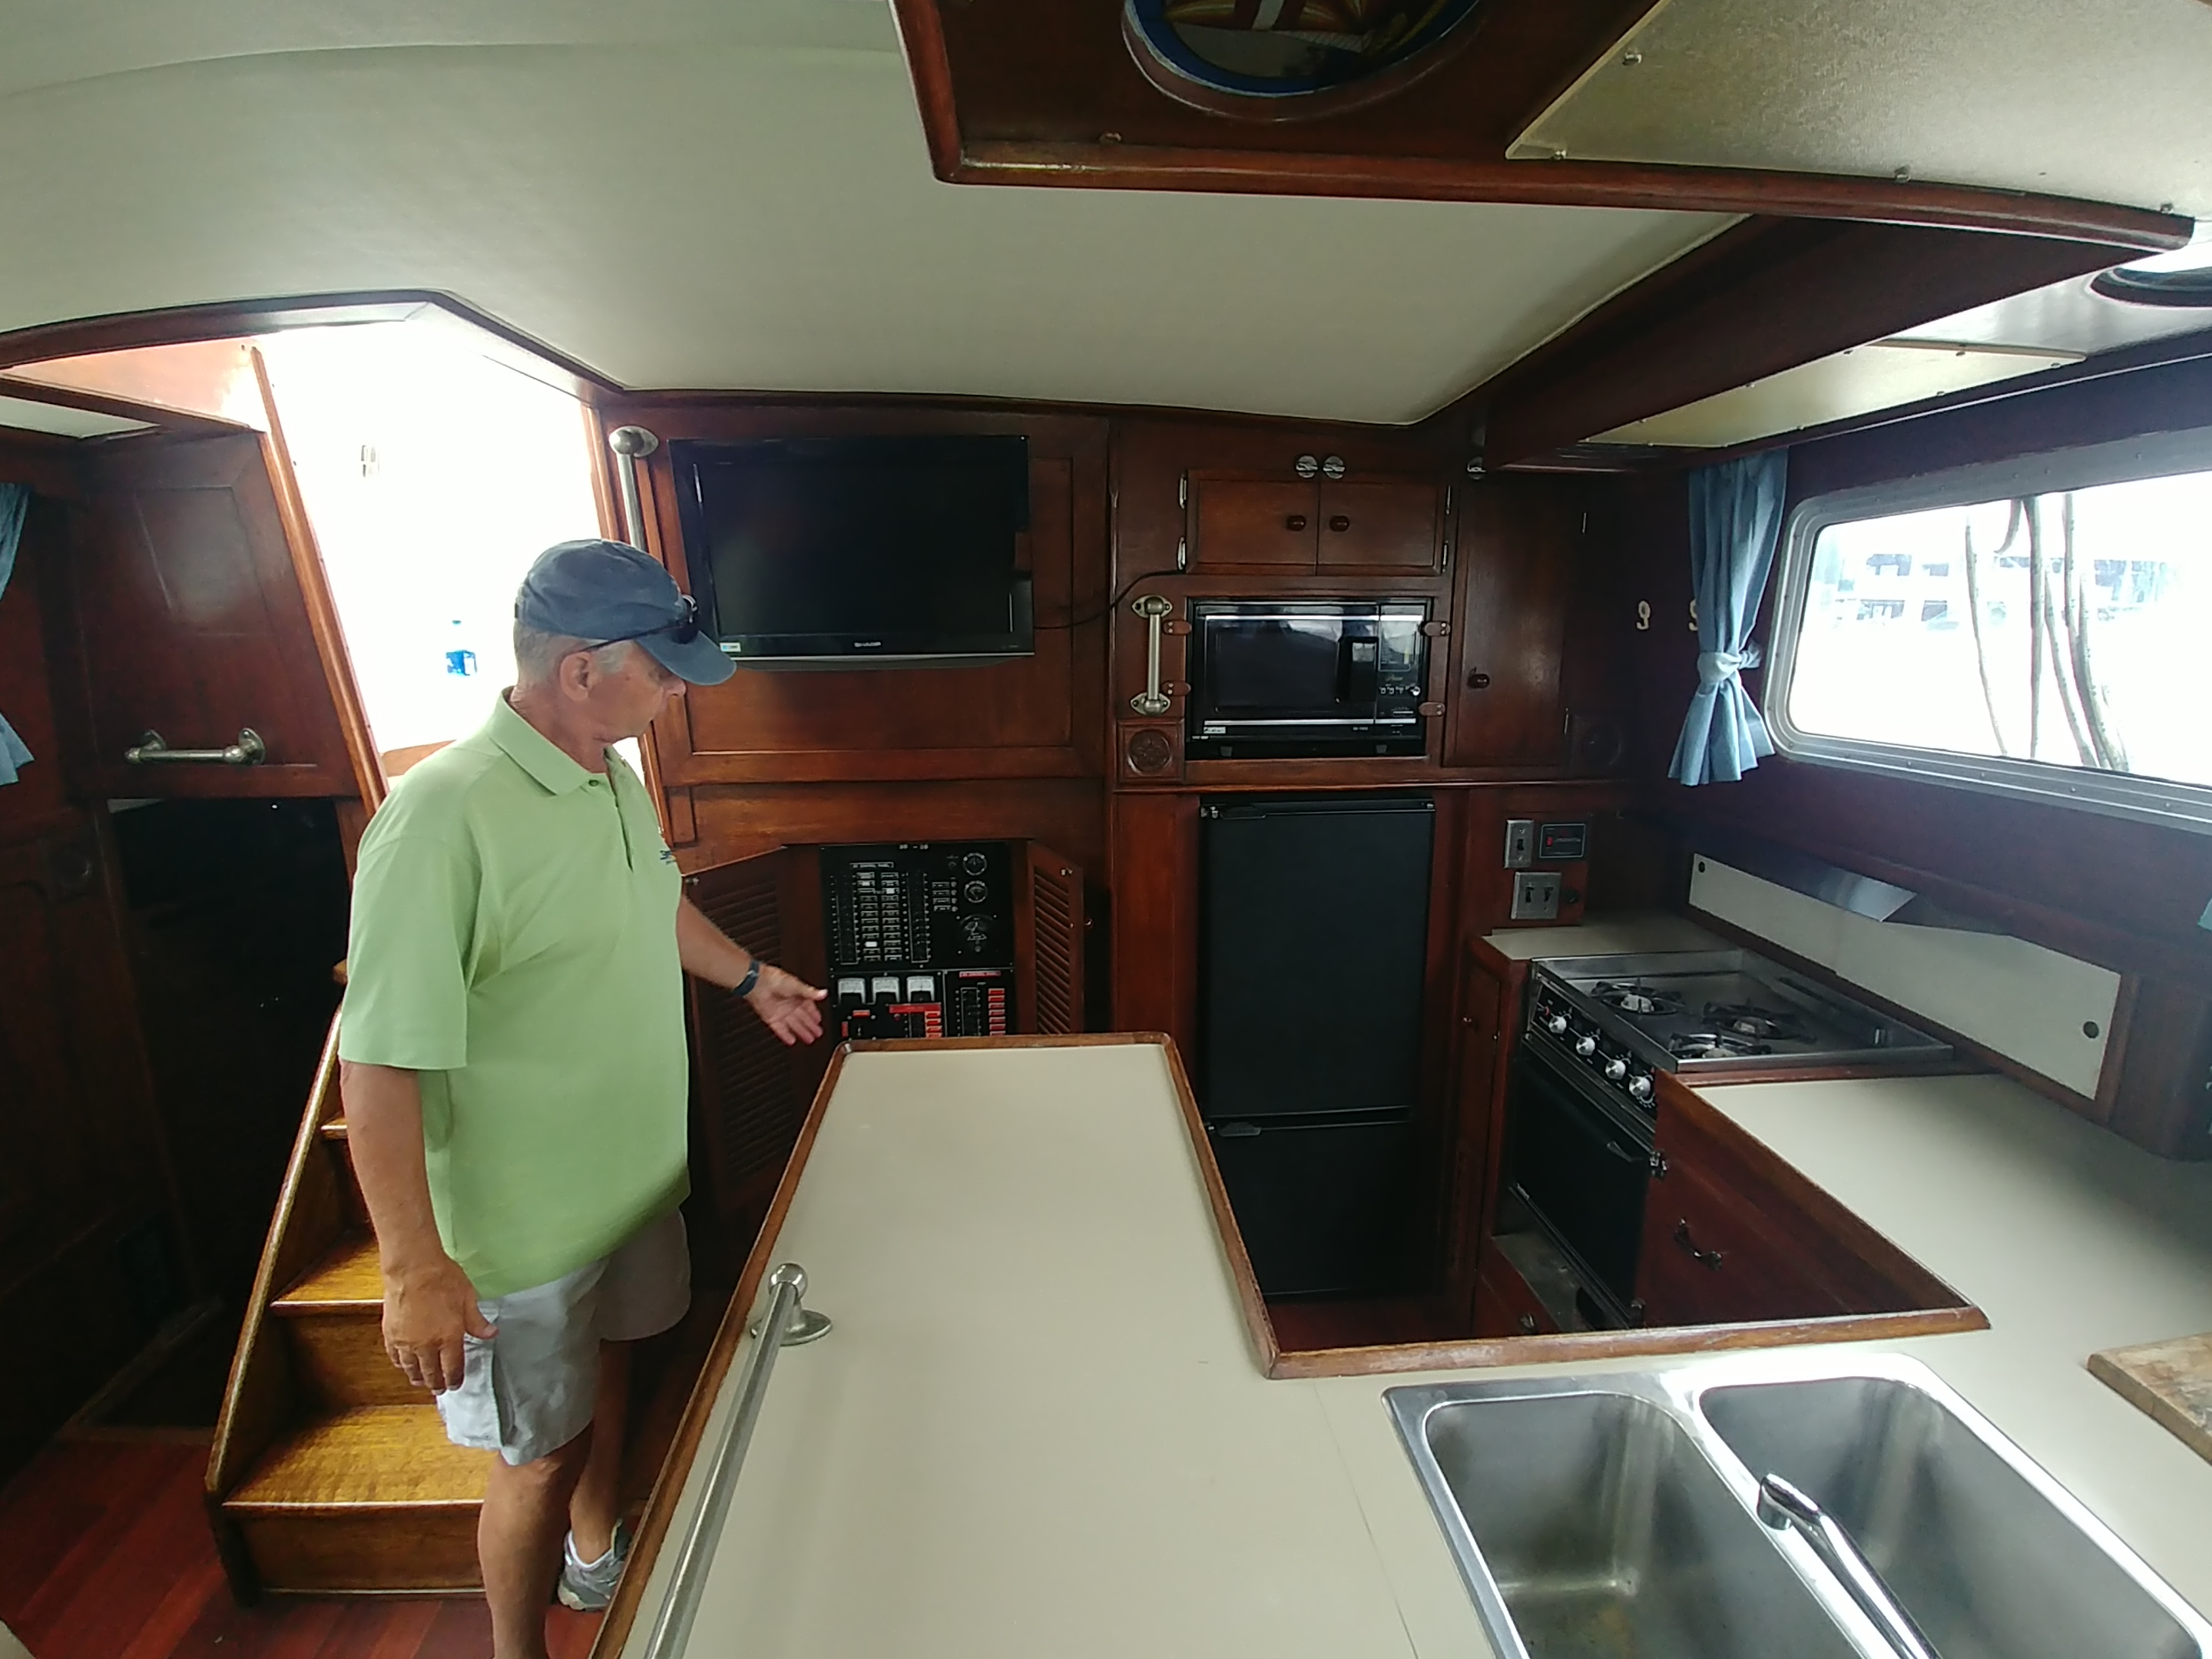 1974 Challenger  50' Sailboat for sale in South Park Village, WA - image 5 